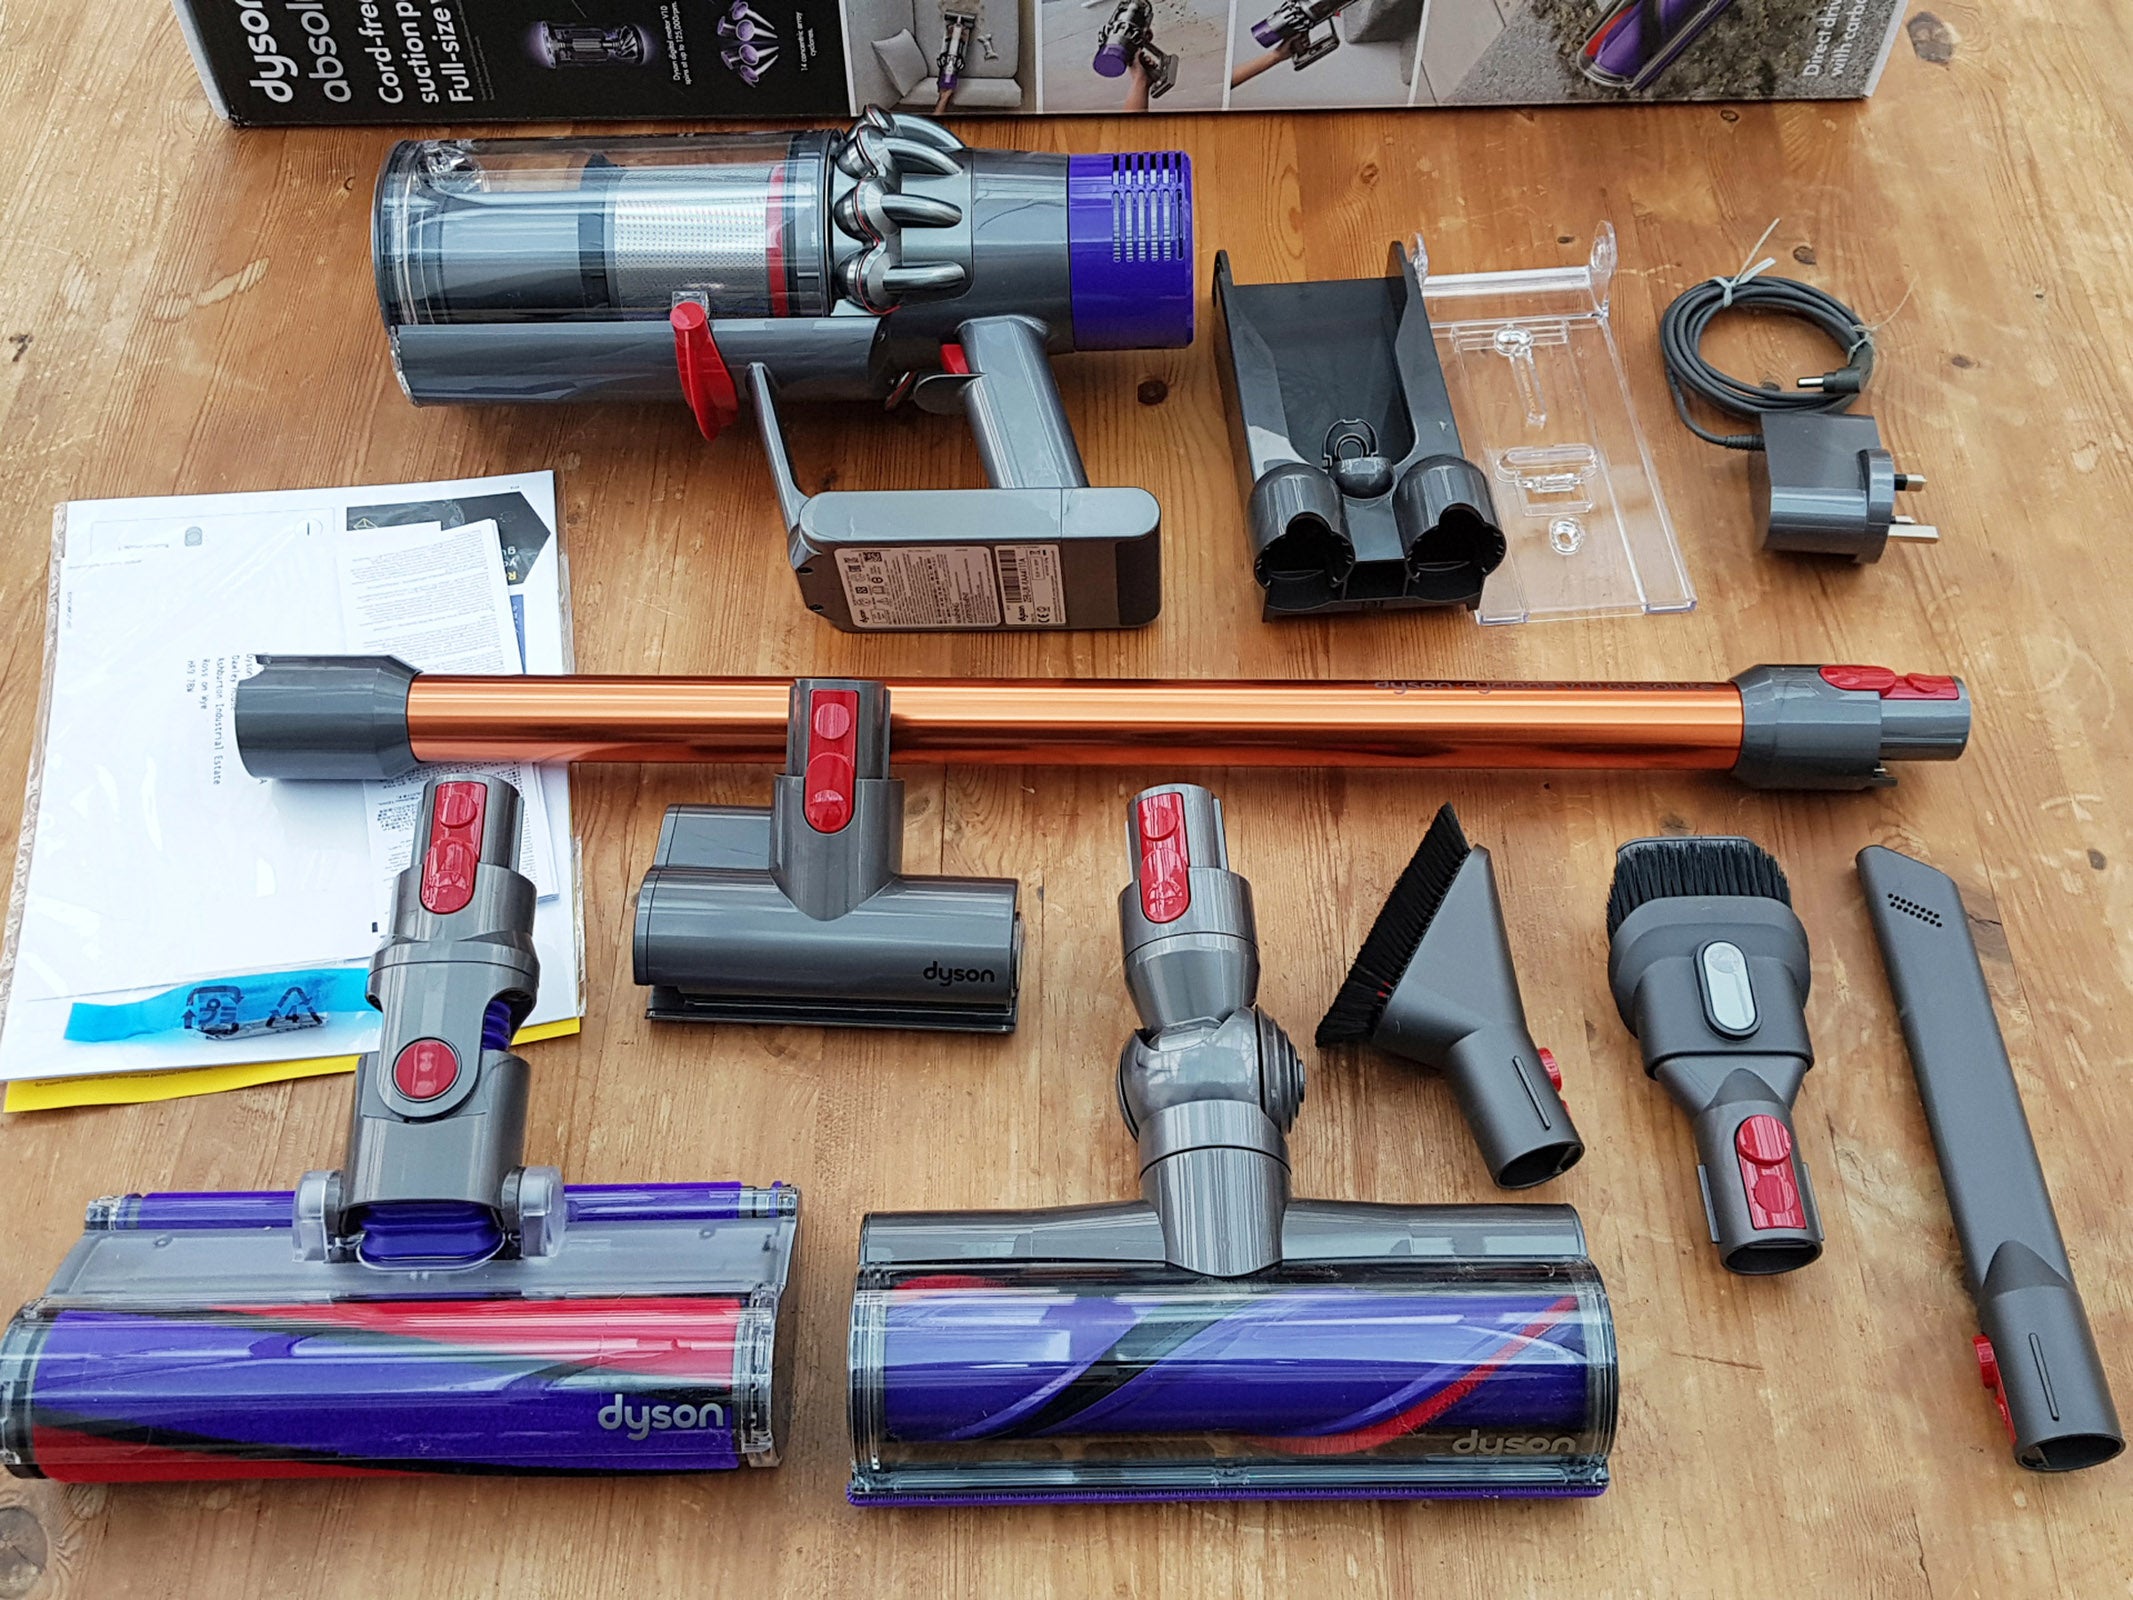 Dyson Cyclone V10 Absolute Review | Trusted Reviews